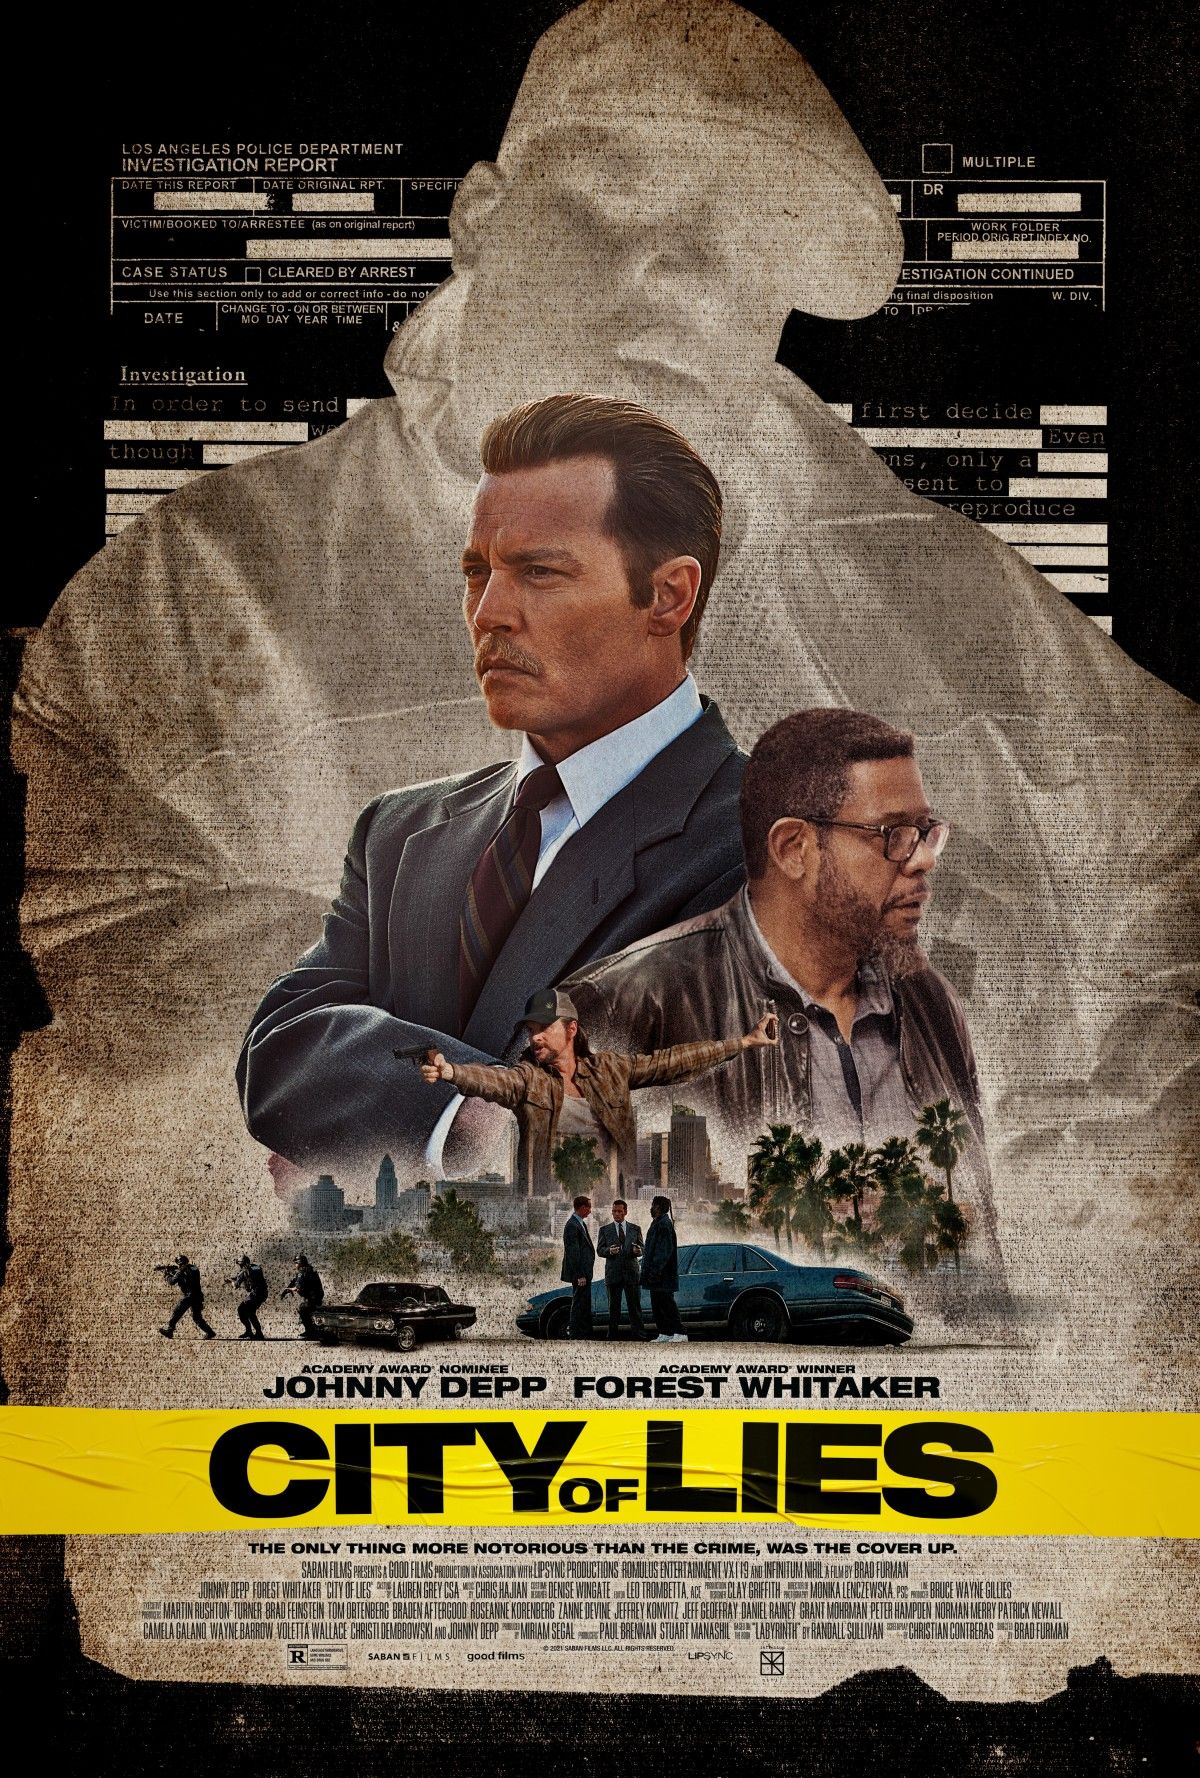 city-of-lies-poster-johnny-depp-forest-whitaker